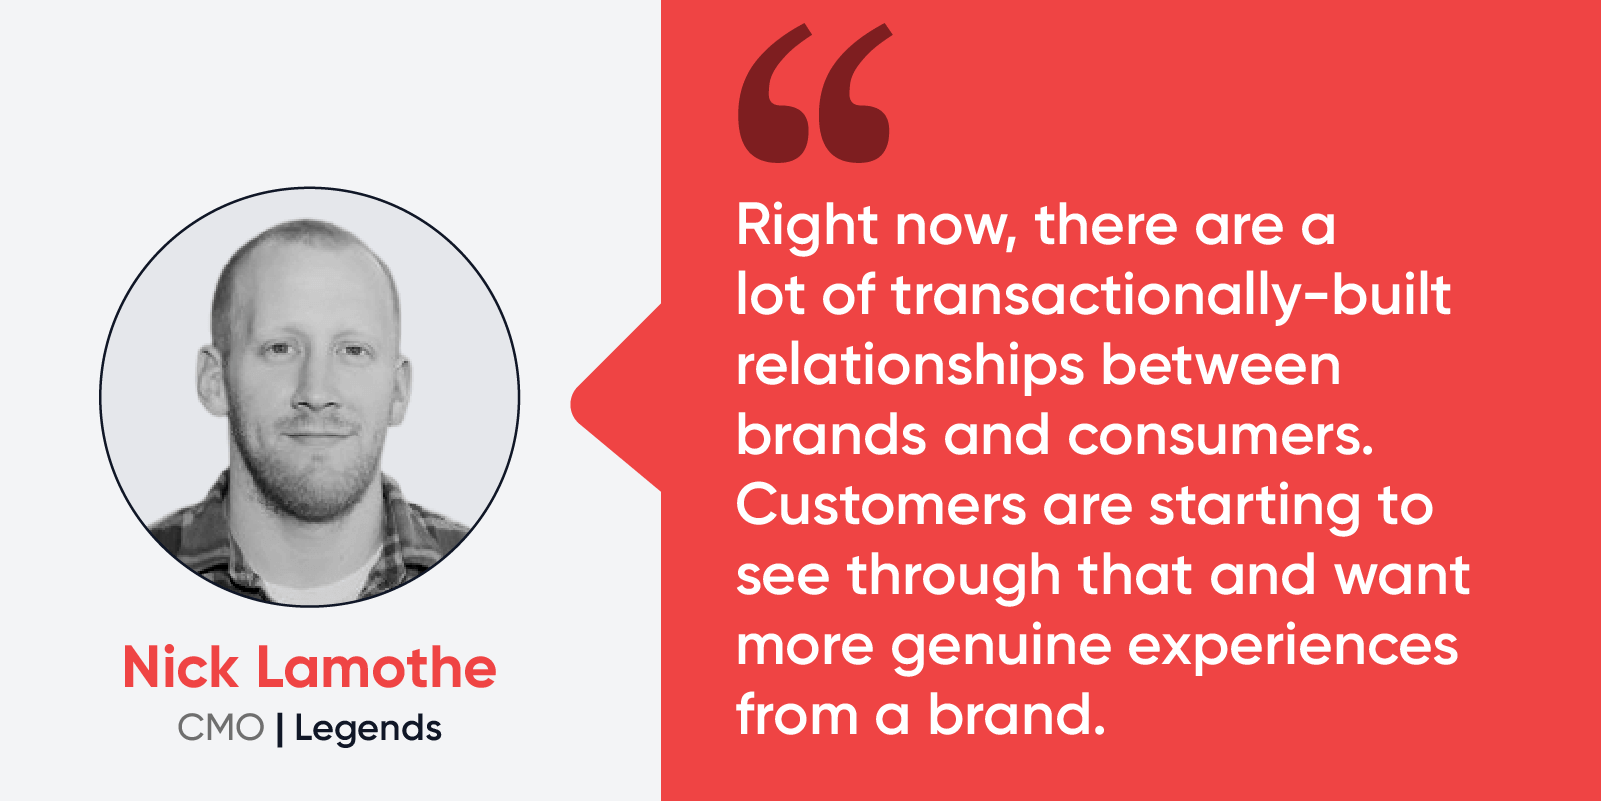 Quote by Nick Lamothe, CMO at Legends: “Right now, there are a lot of transactionally-built relationships between brands and consumers. Customers are starting to see through that and want more genuine experiences from a brand.” 